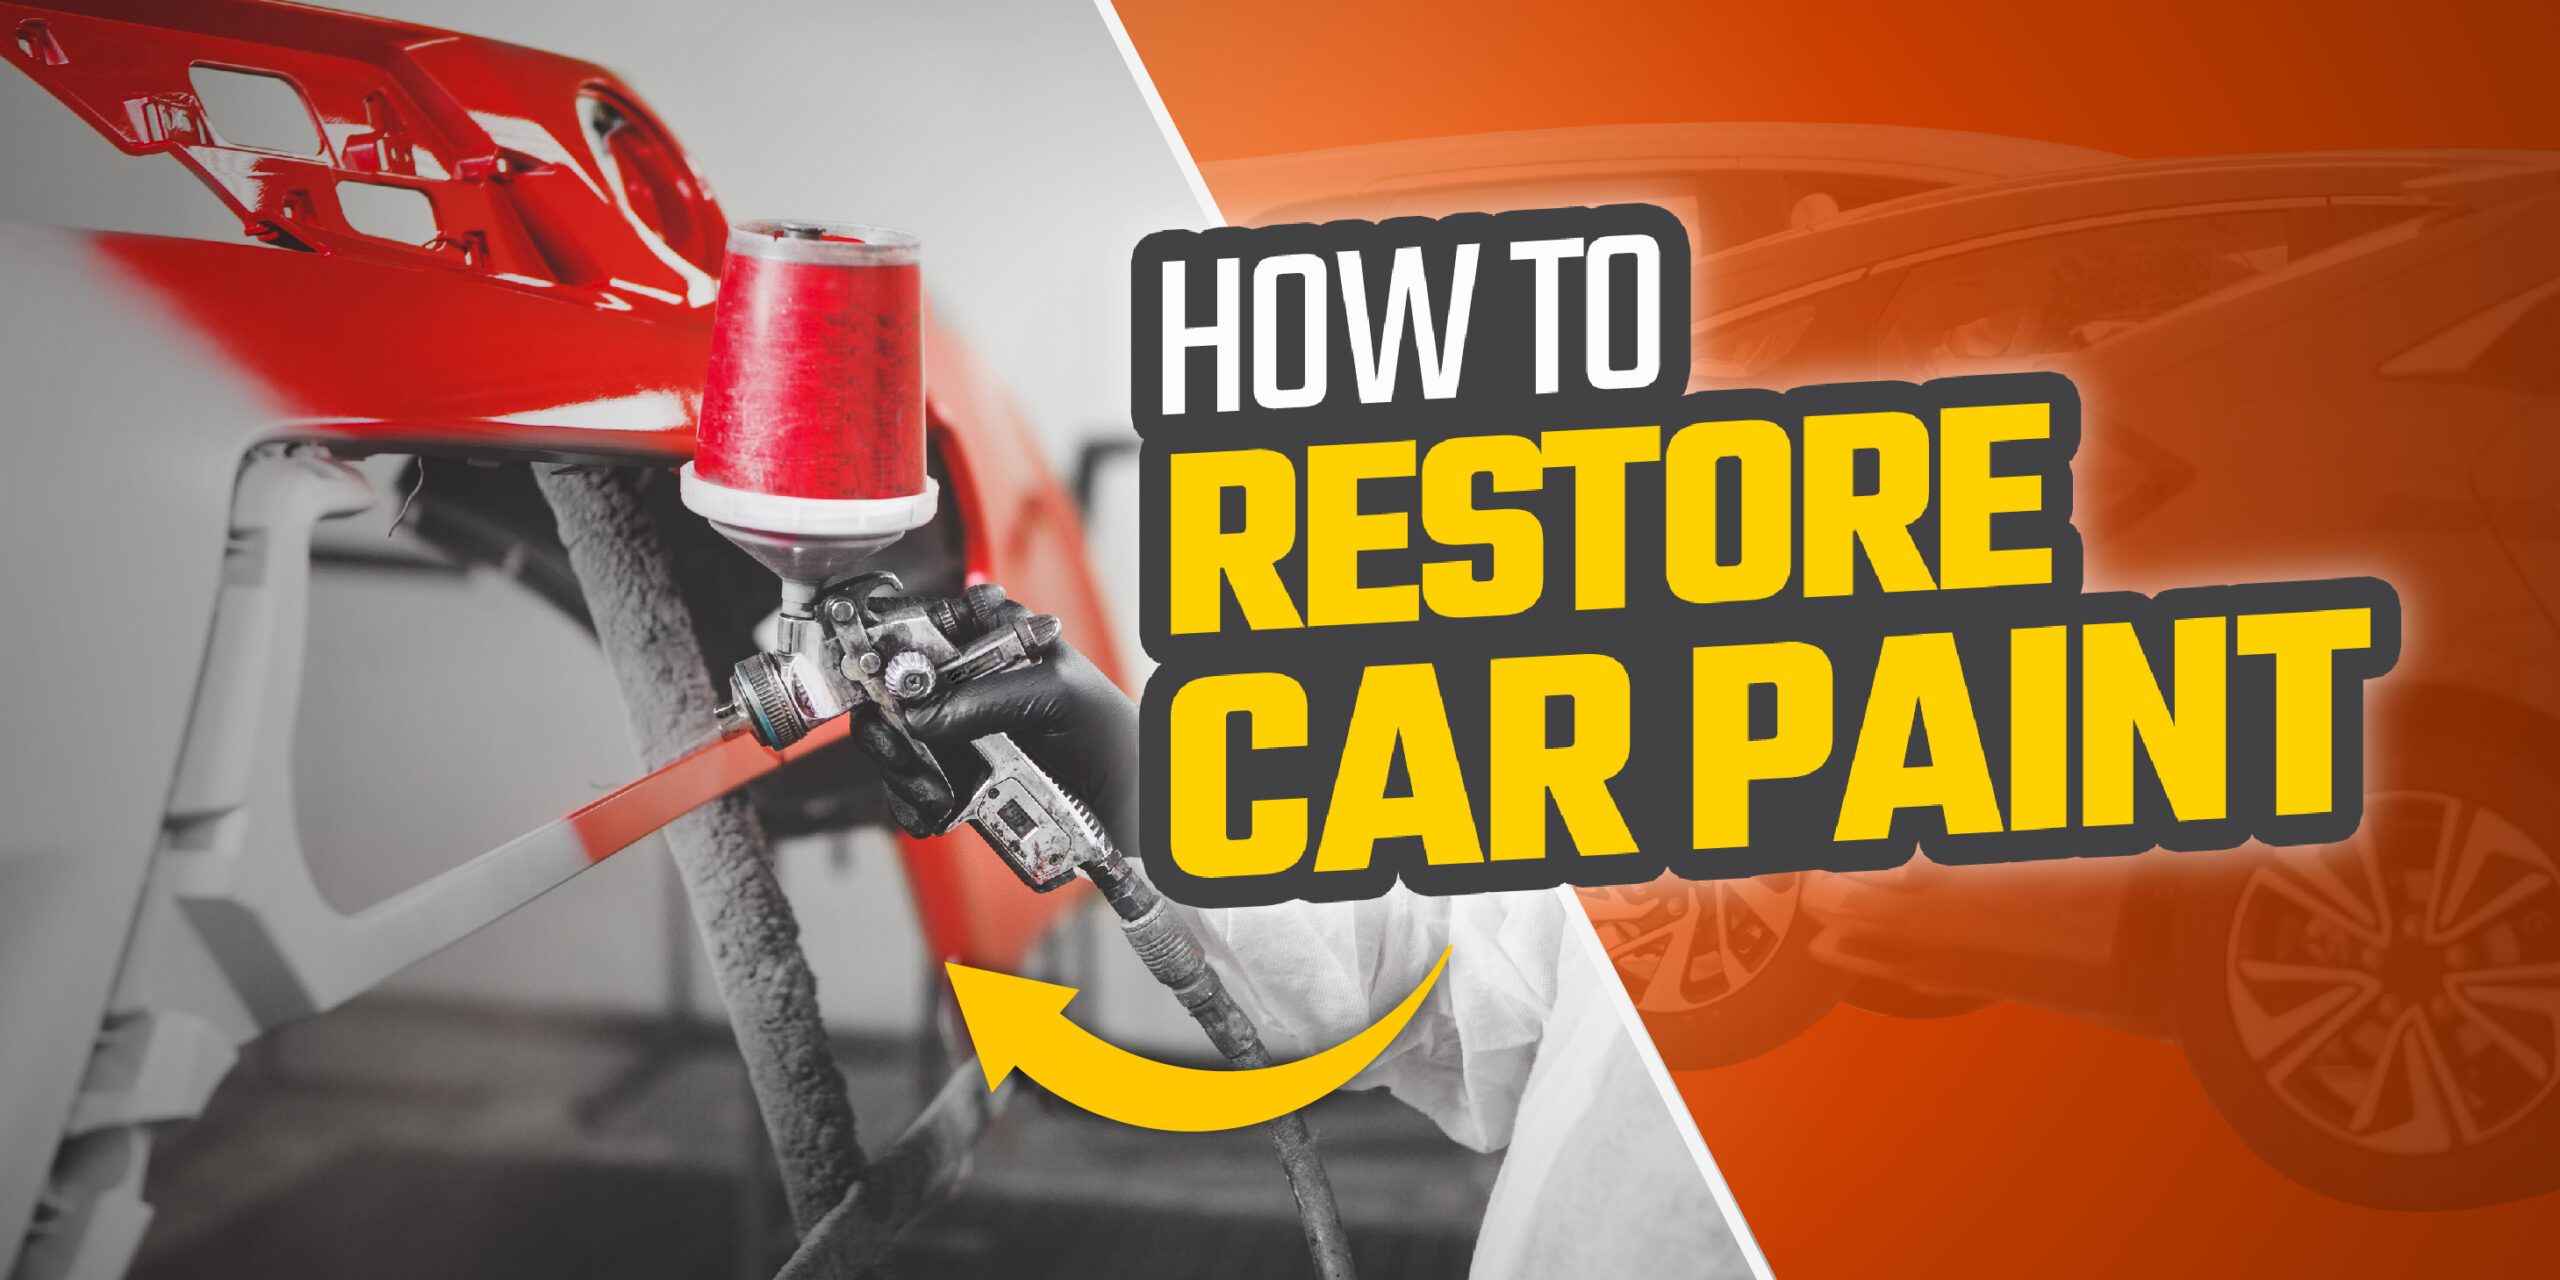 Instantly Restore your car's PAINT - wipe away Scratches, Faded